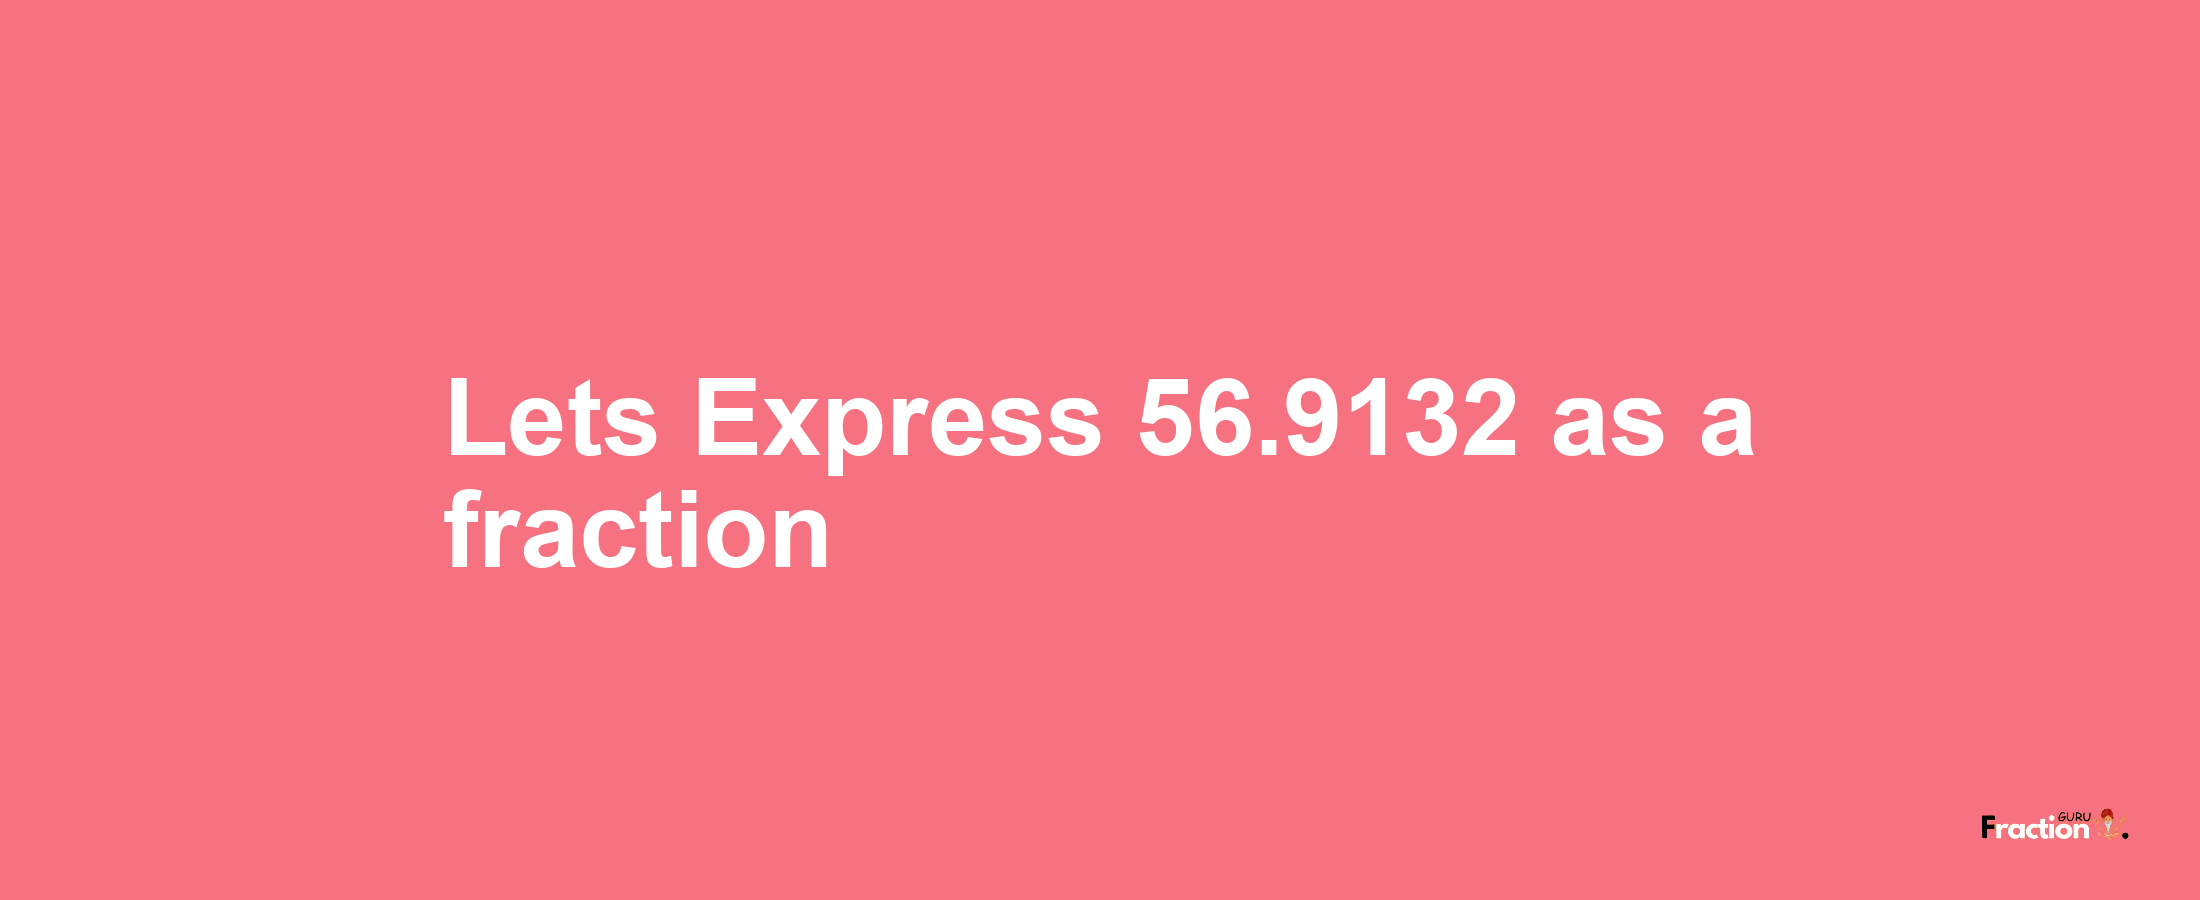 Lets Express 56.9132 as afraction